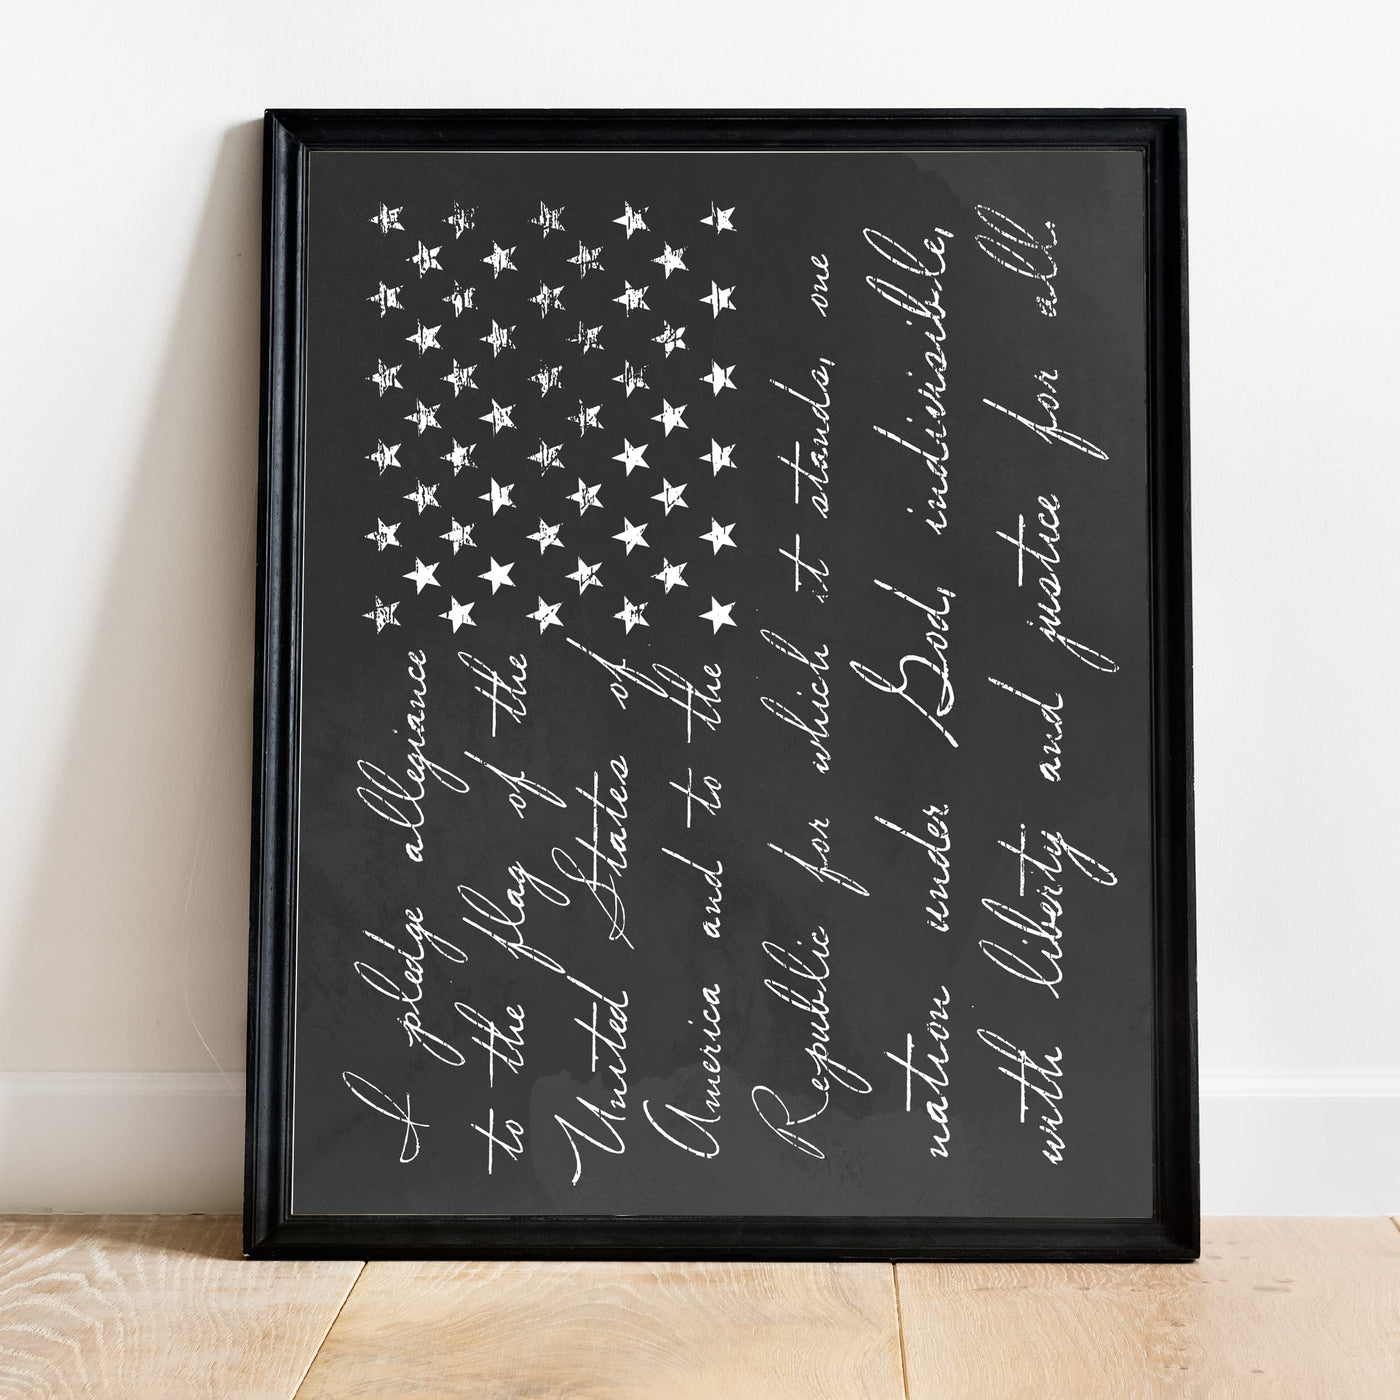 I Pledge Allegiance to the Flag Patriotic Wall Art Decor -11 x 14" Rustic American Flag Print -Ready to Frame. Inspirational Home-Office-School-Man Cave-Military Decor. Display Your Patriotism!